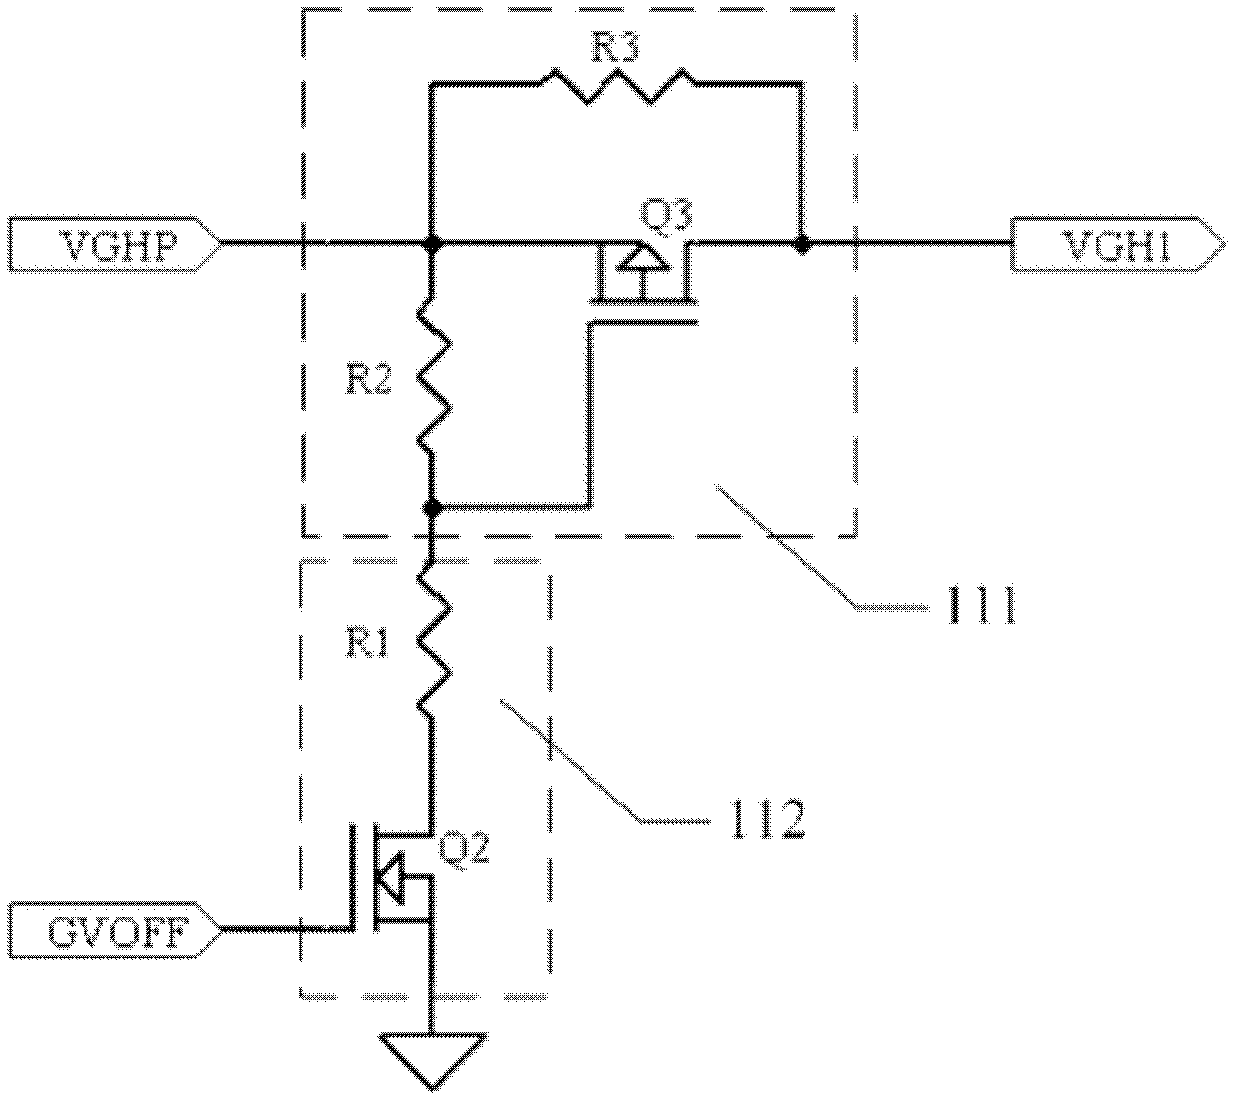 Corner cutting circuit in LCD driving system